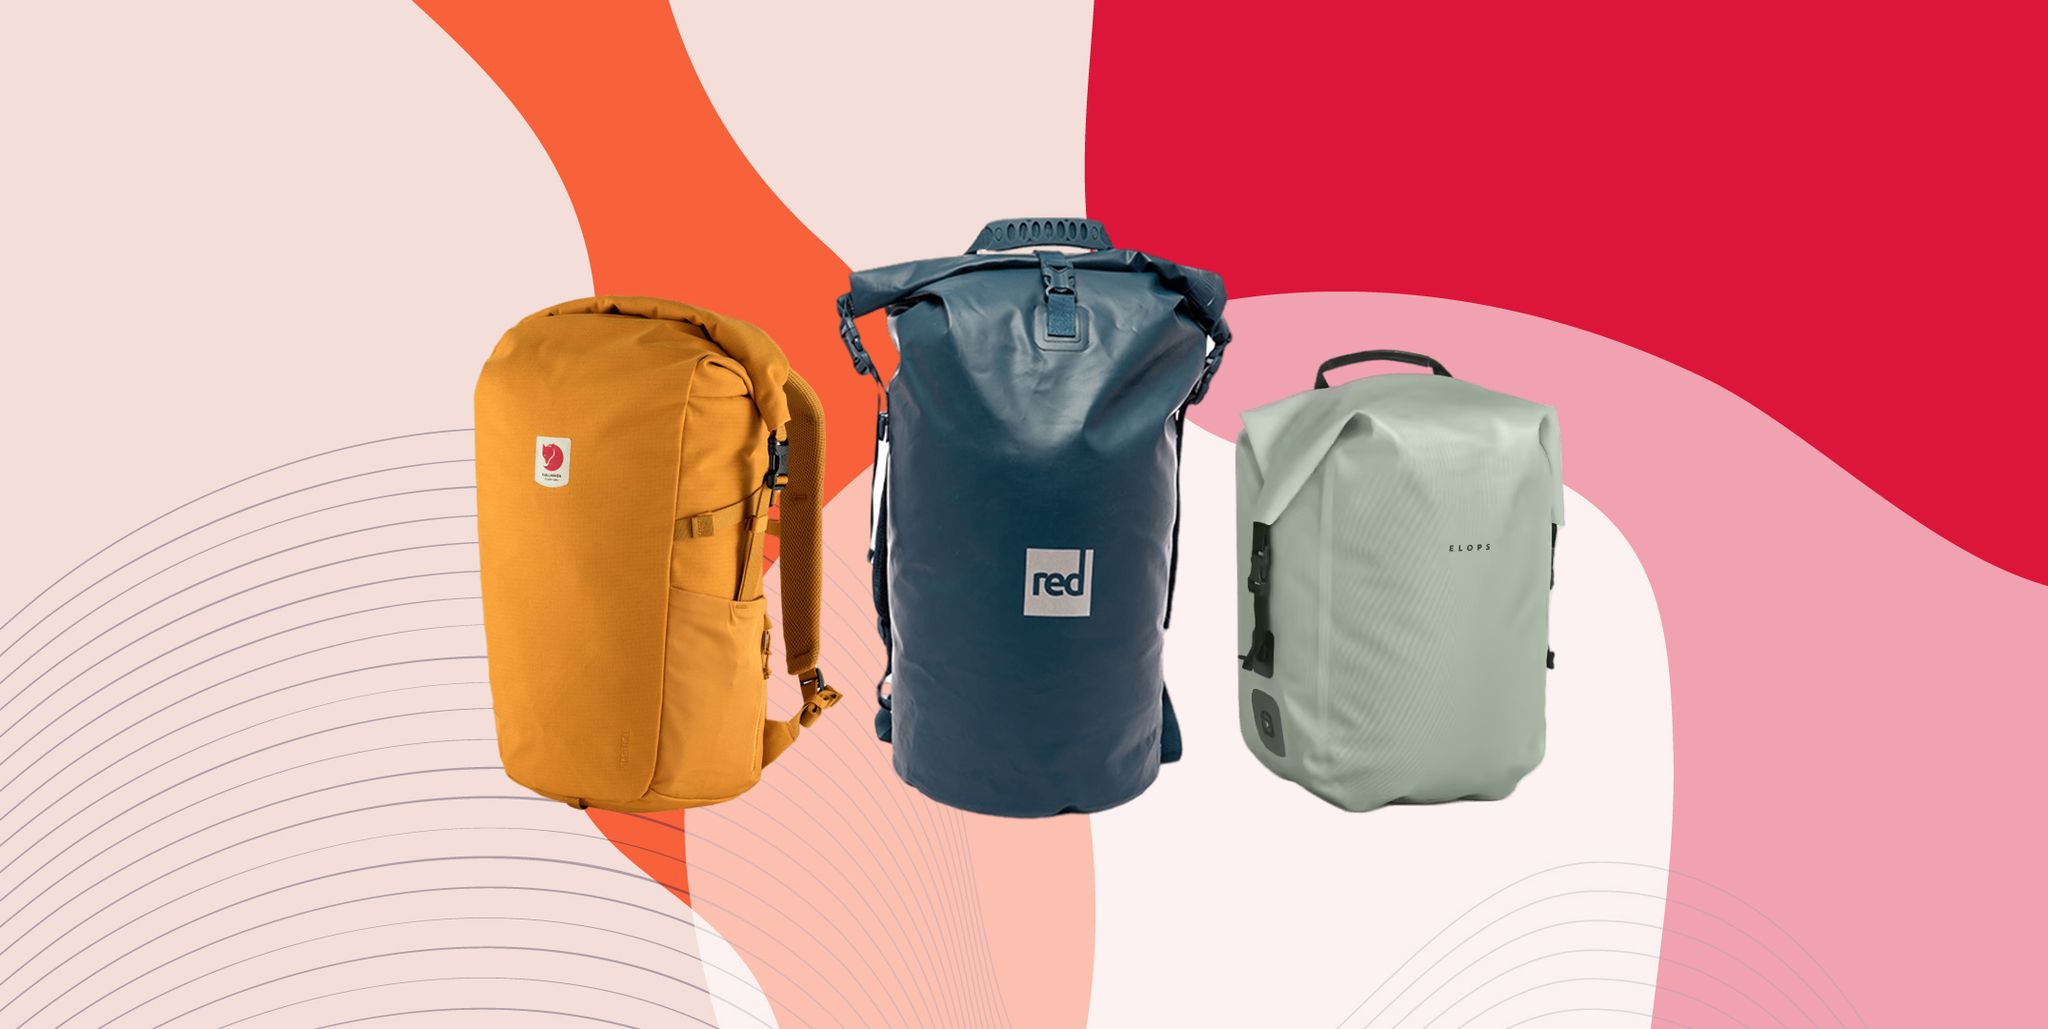 Yeti's Travel Bags Are Perfect for Summer Adventures